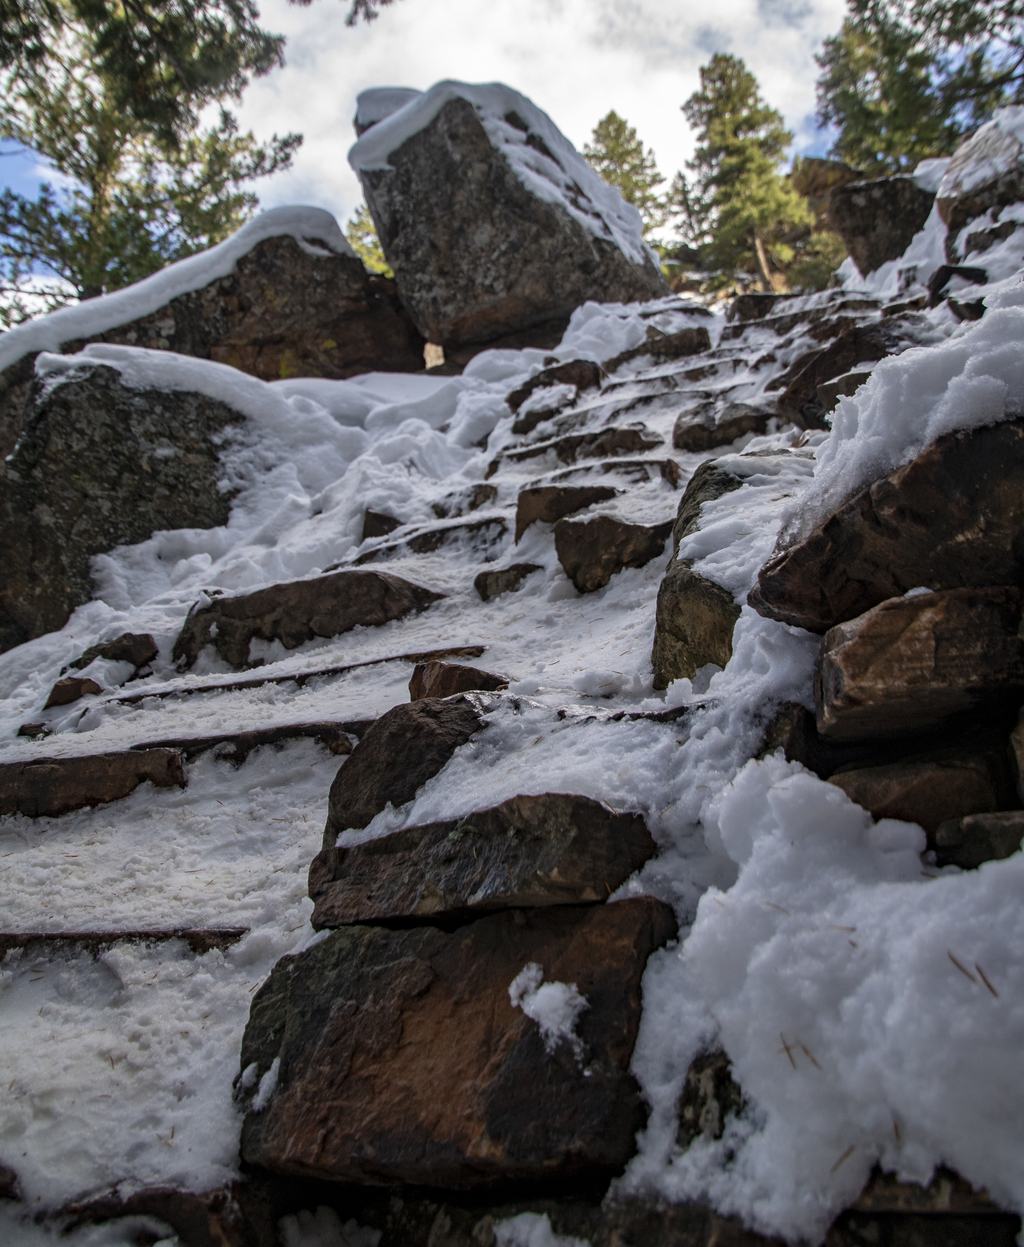 Icy Steps